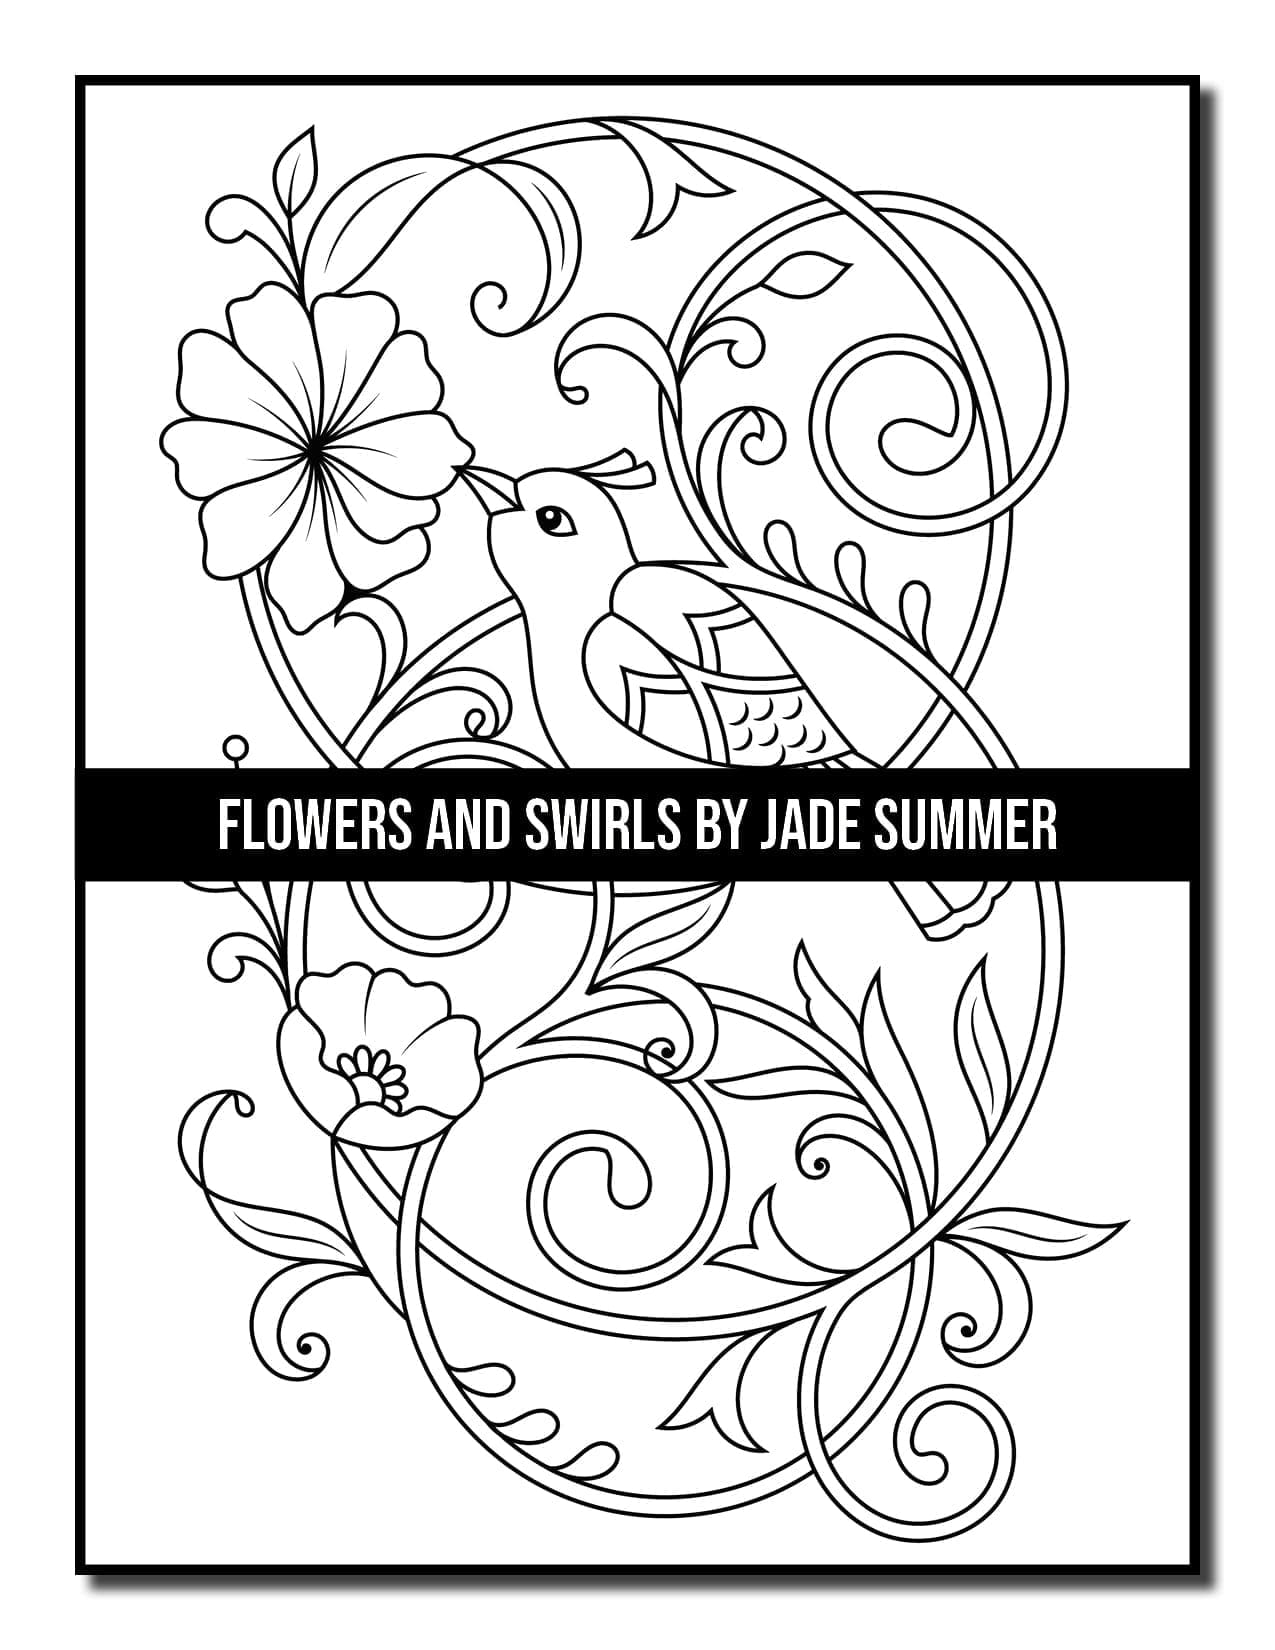 Flowers and Swirls: An Adult Coloring Book with Flowers Swirls and More! Patterns Animals 